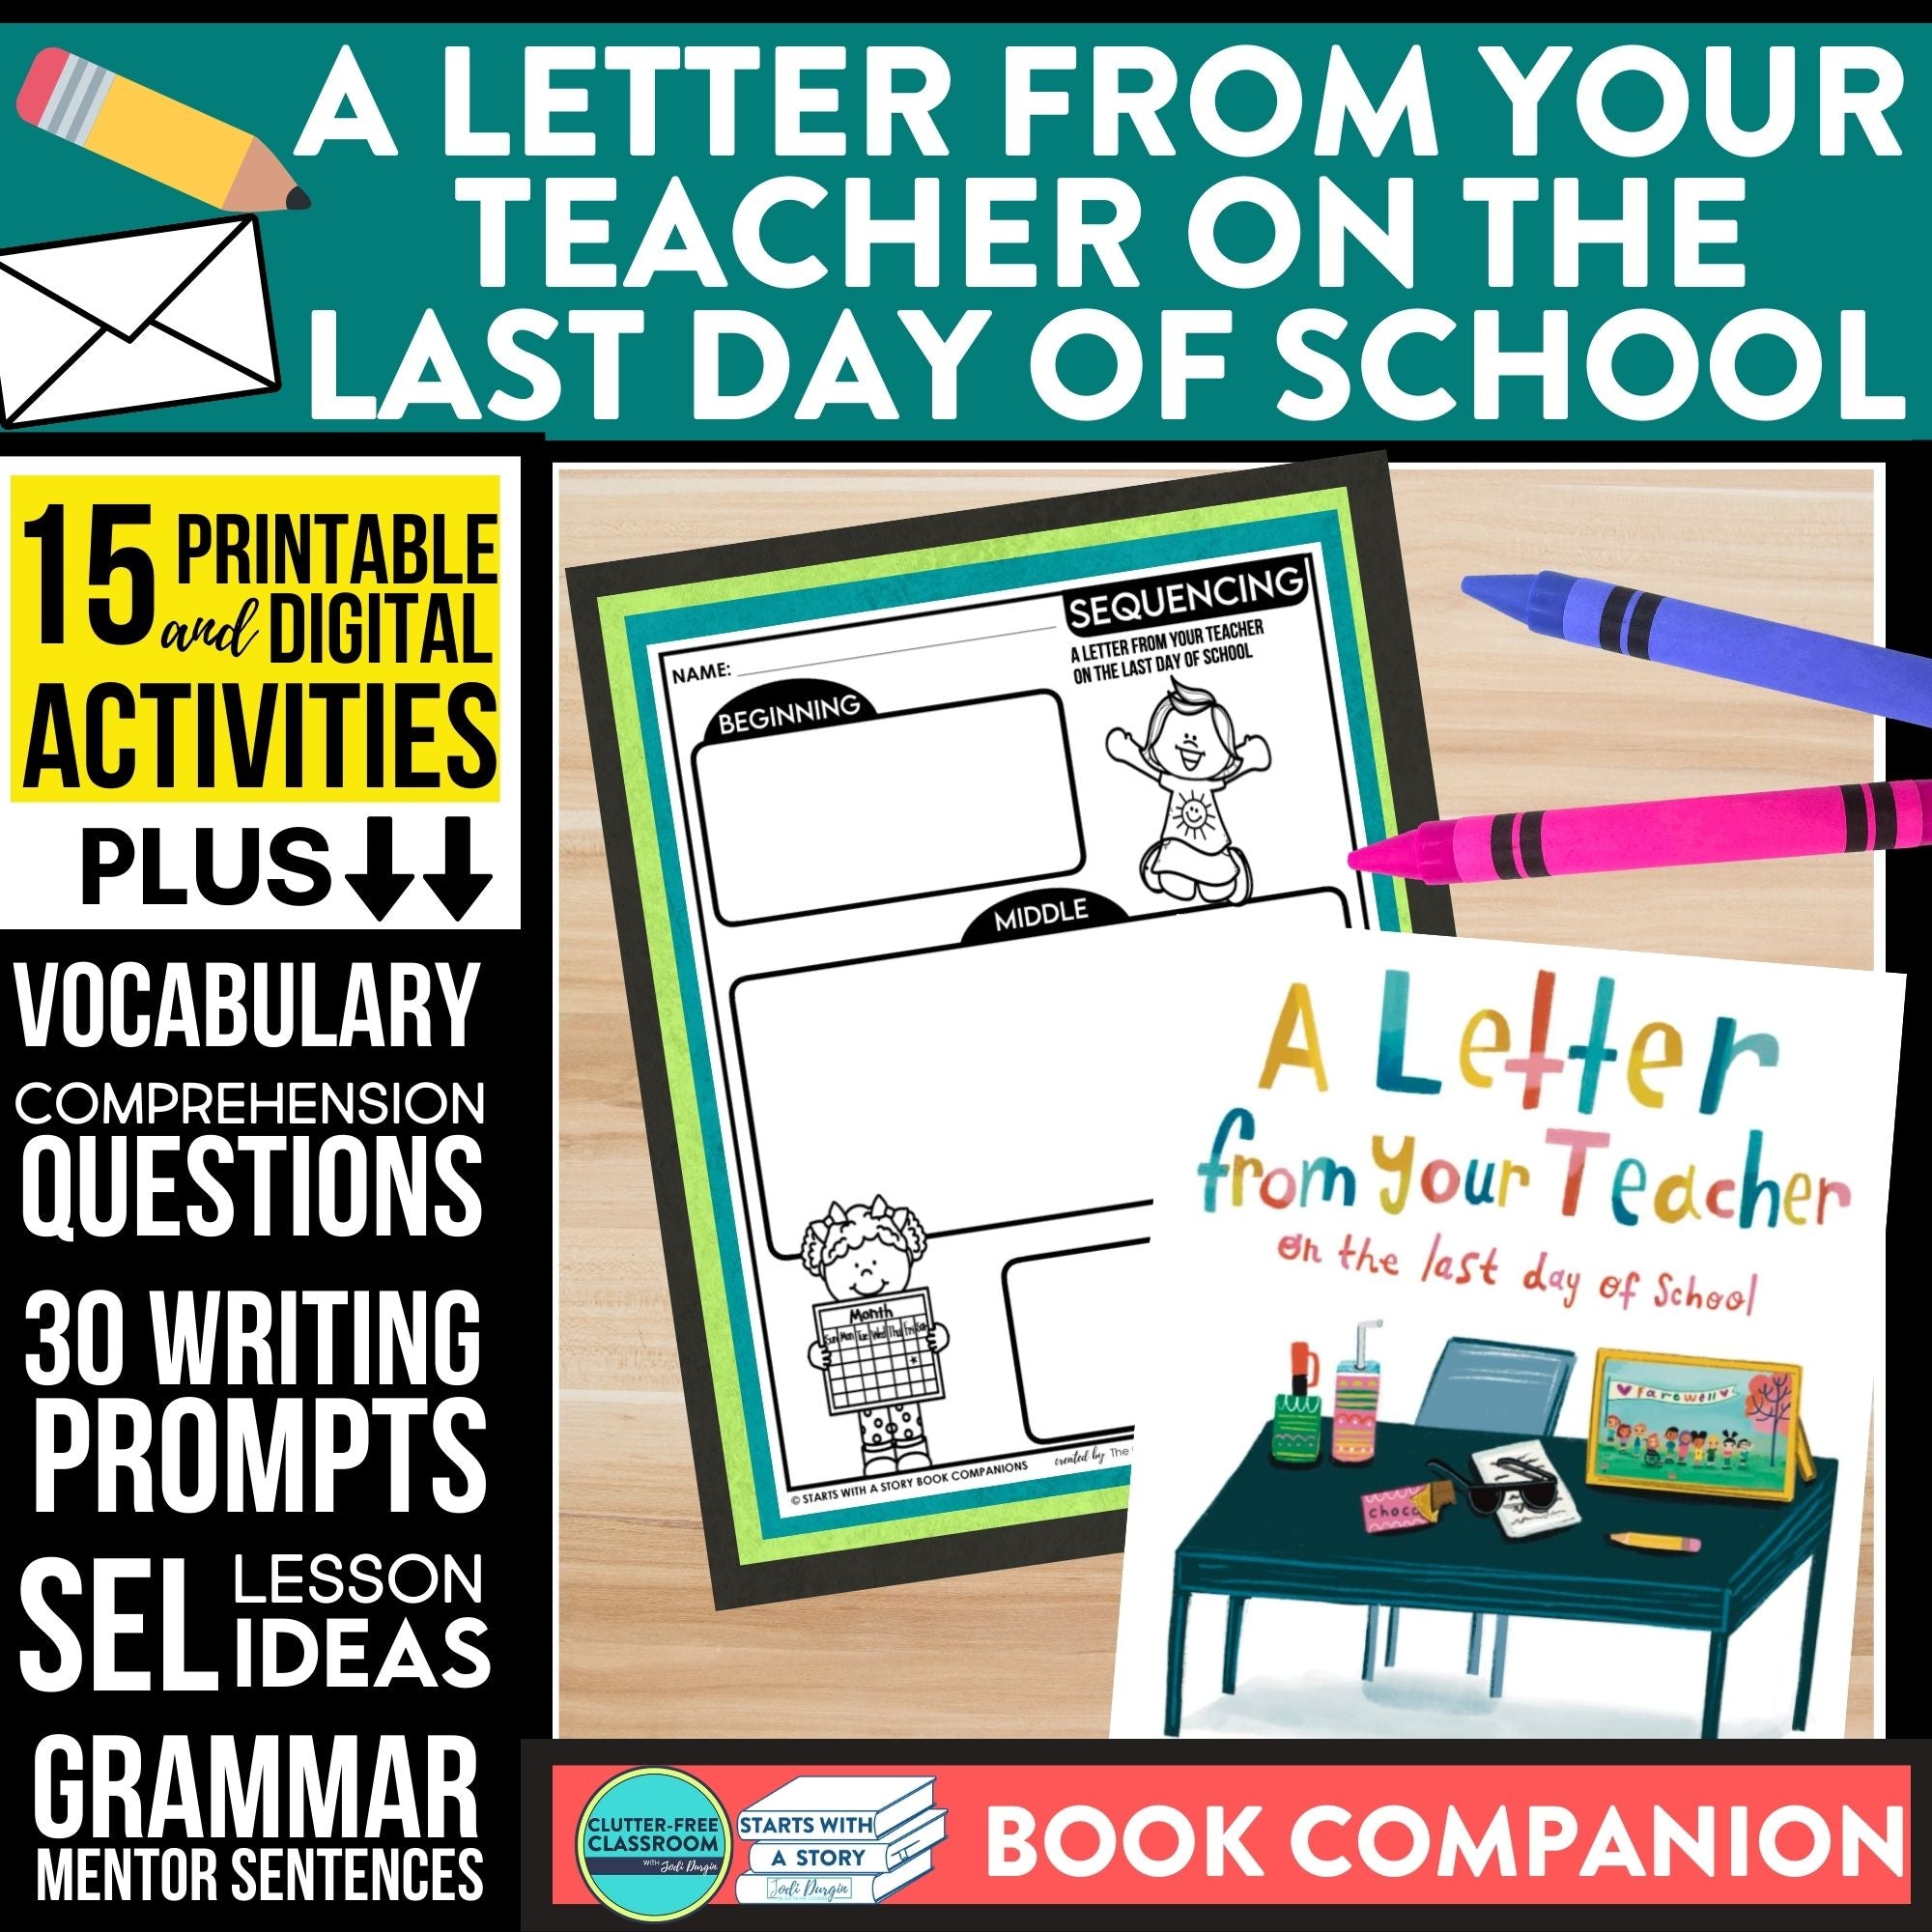 A LETTER FROM YOUR TEACHER ON THE LAST DAY OF SCHOOL activities and lesson plan ideas